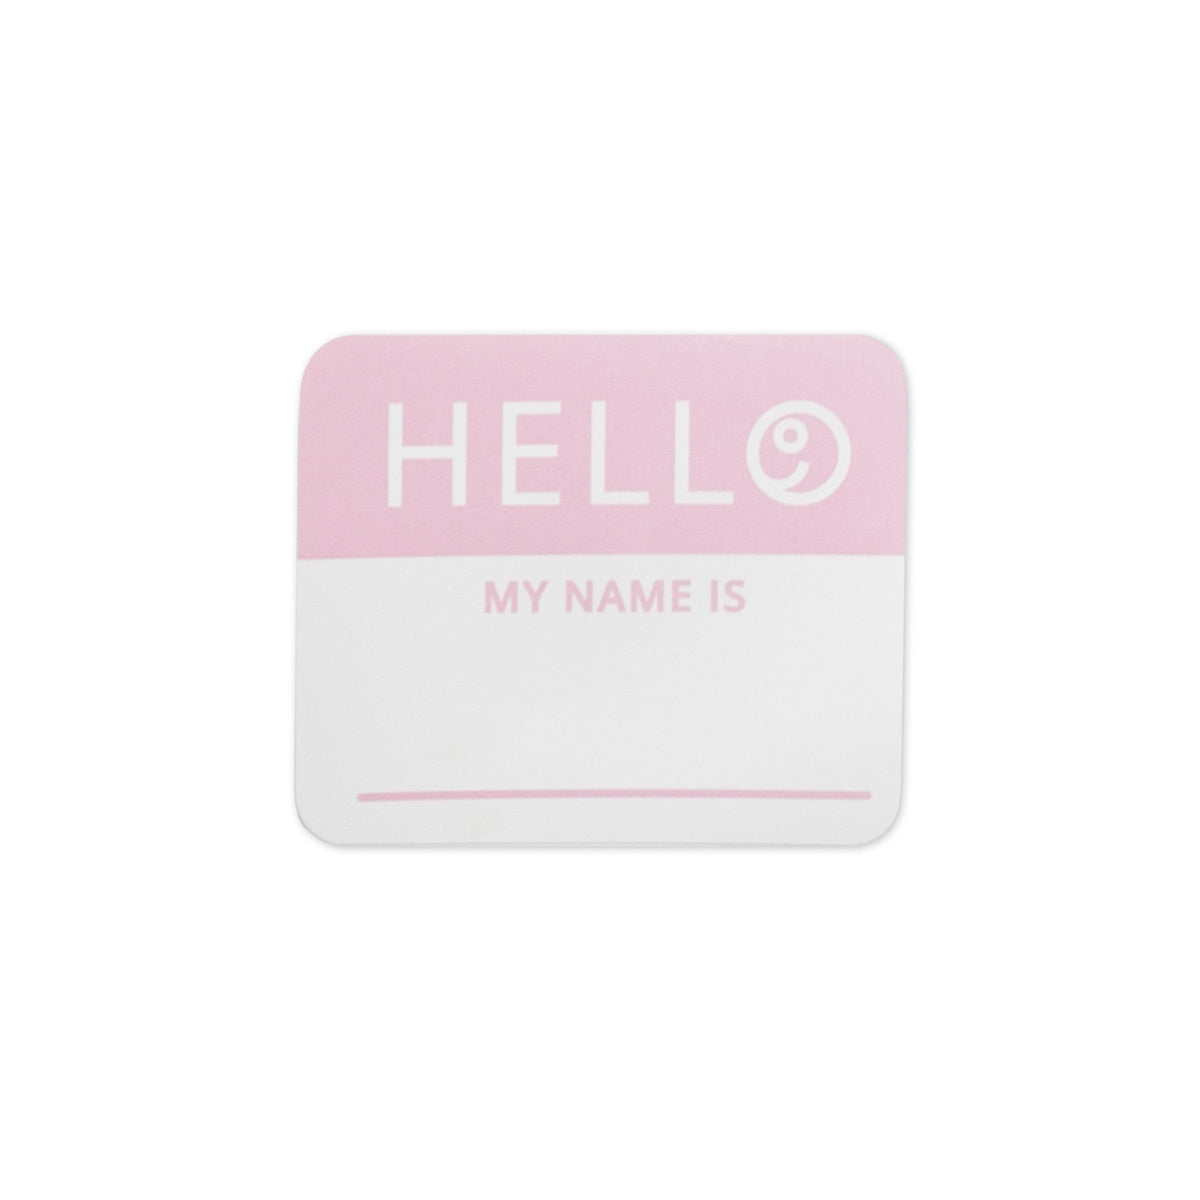 personalised new born gifts by Elli Junior Baby wear Trading LLC